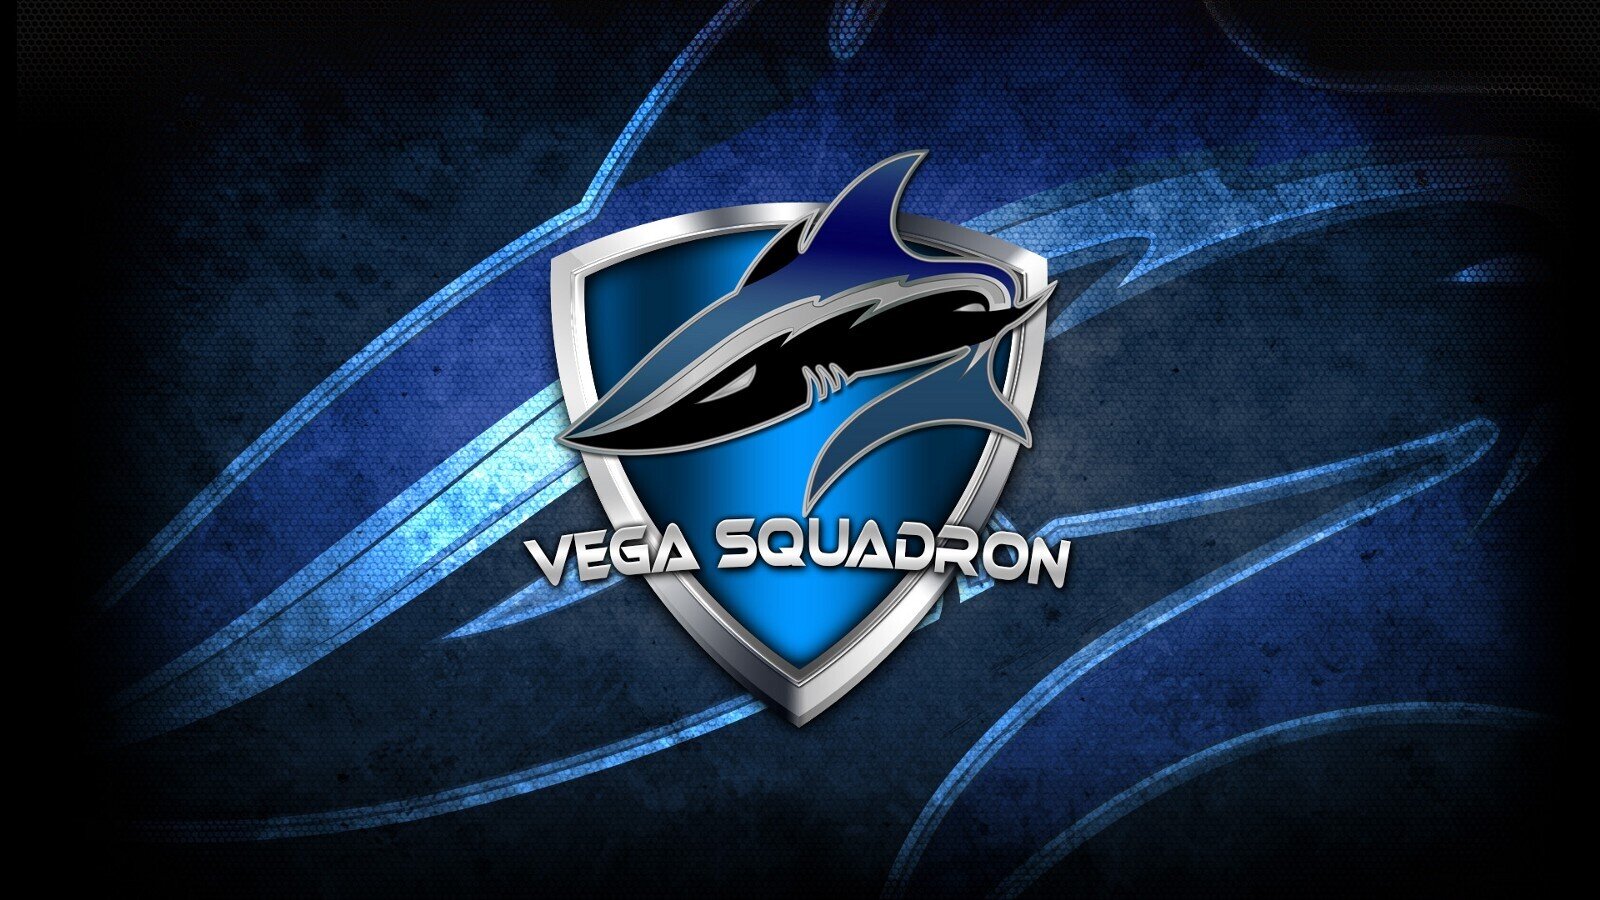 Vega Squadron’s Dota 2 team have become free agents, released by the organization due to underwhelming results.